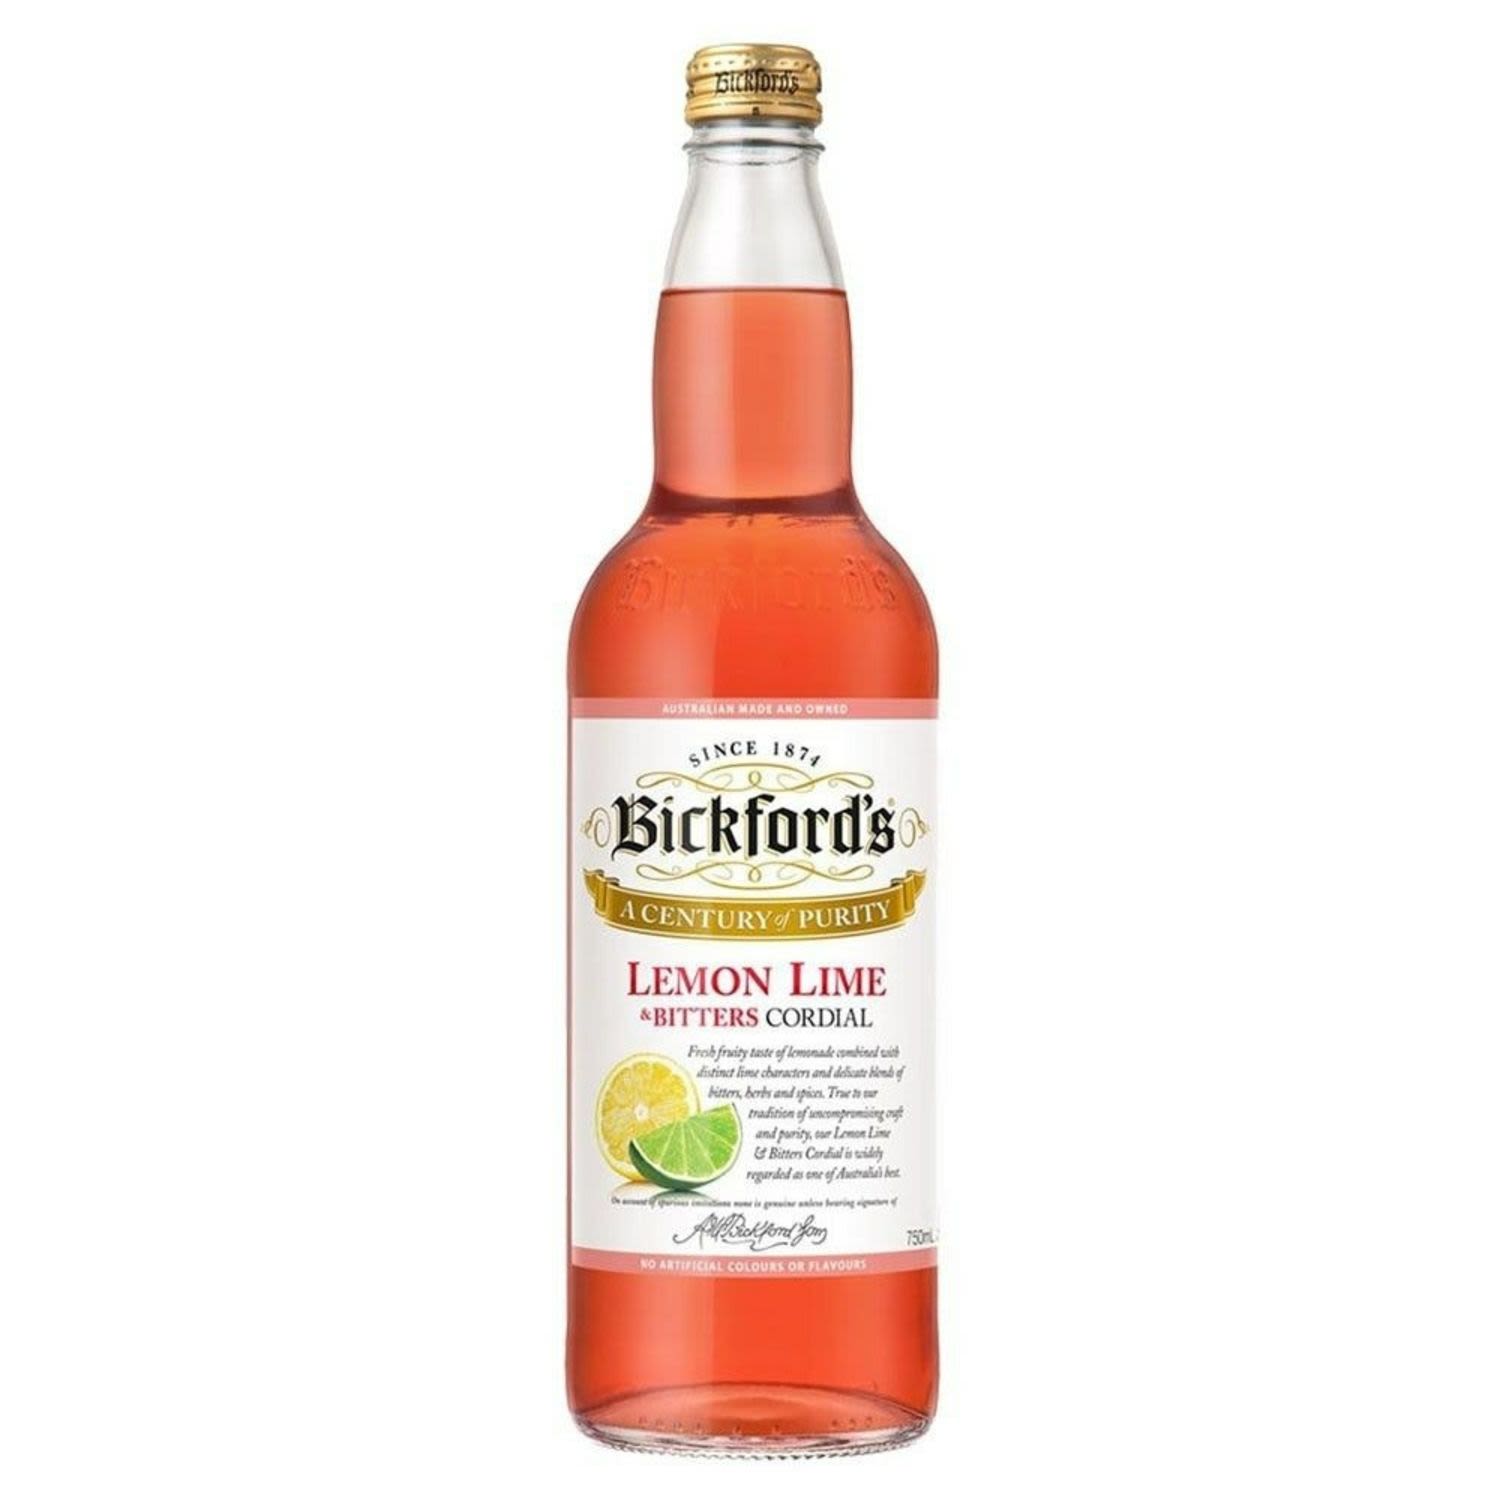 The fresh fruity taste of lemonade combined with distinct lime characters and delicate blends of bitters, herbs and spices. True to Bickford’s tradition of uncompromising craft and purity, Bickford’s Lemon Lime & Bitters Cordial is widely regarded as one of Australia’s best.<br /> <br />Alcohol Volume: 0.0%<br /><br />Pack Format: Bottle<br /><br />Standard Drinks: 0.0<br /><br />Pack Type: Bottle<br />